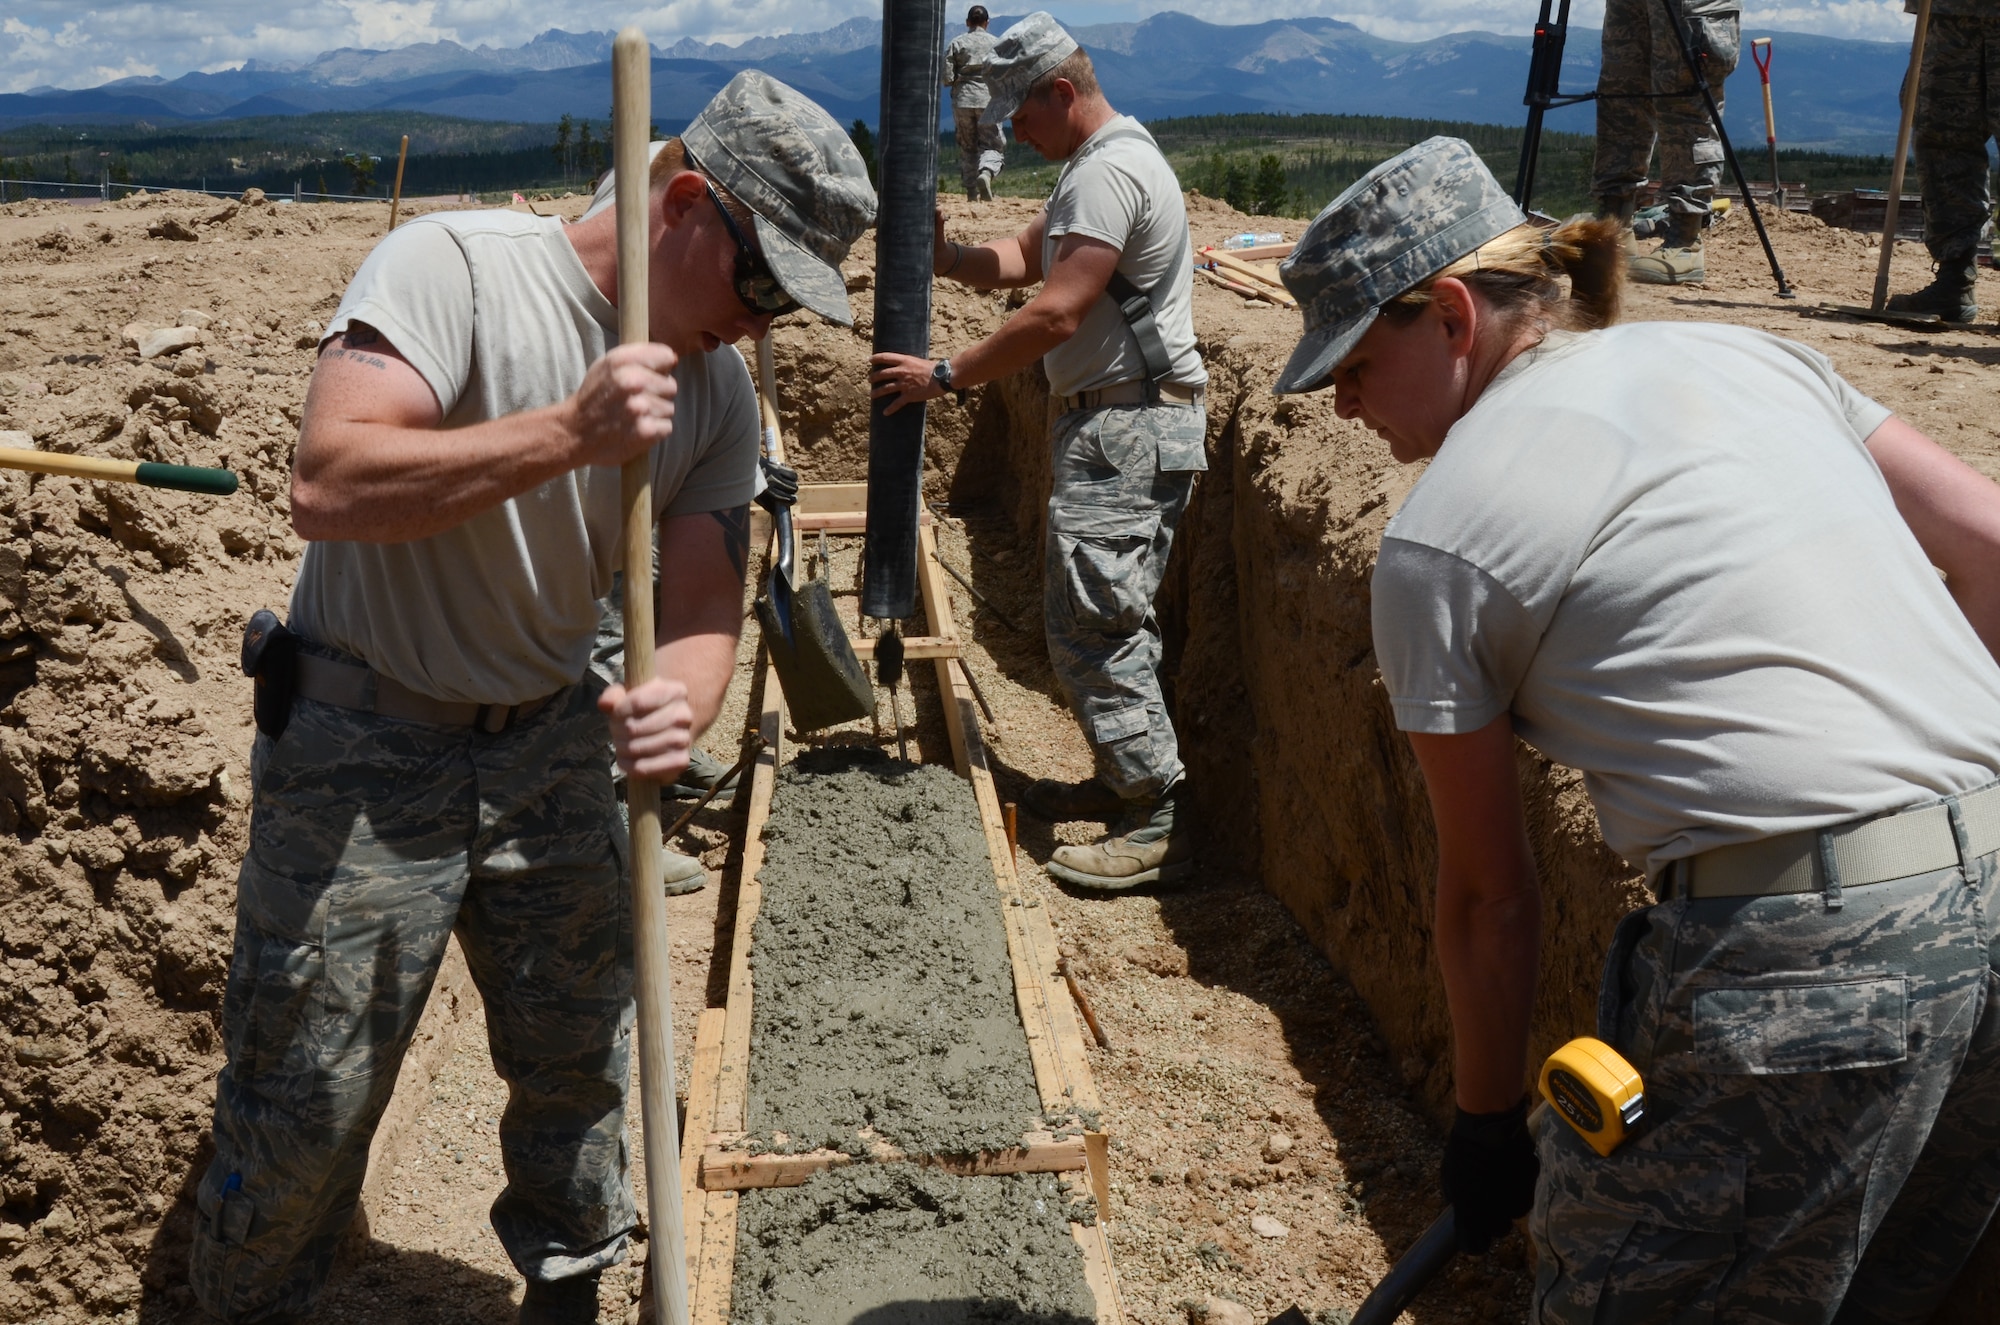 U.S. Air Force Airmen with the Missouri Air National Guard, 139th Civil Engineering Squadron, lays concrete footings for the summer tubing hill kids consessions at Snow Mountain Ranch, near Winter Park, Colo., July 30, 2013.  The Airmen provided assistance with the construction and maintenance of various structures throughout the camp during an Innovative Readiness Training mission.   (U.S. Air National Guard photo by Senior Airman Patrick P. Evenson/Released)